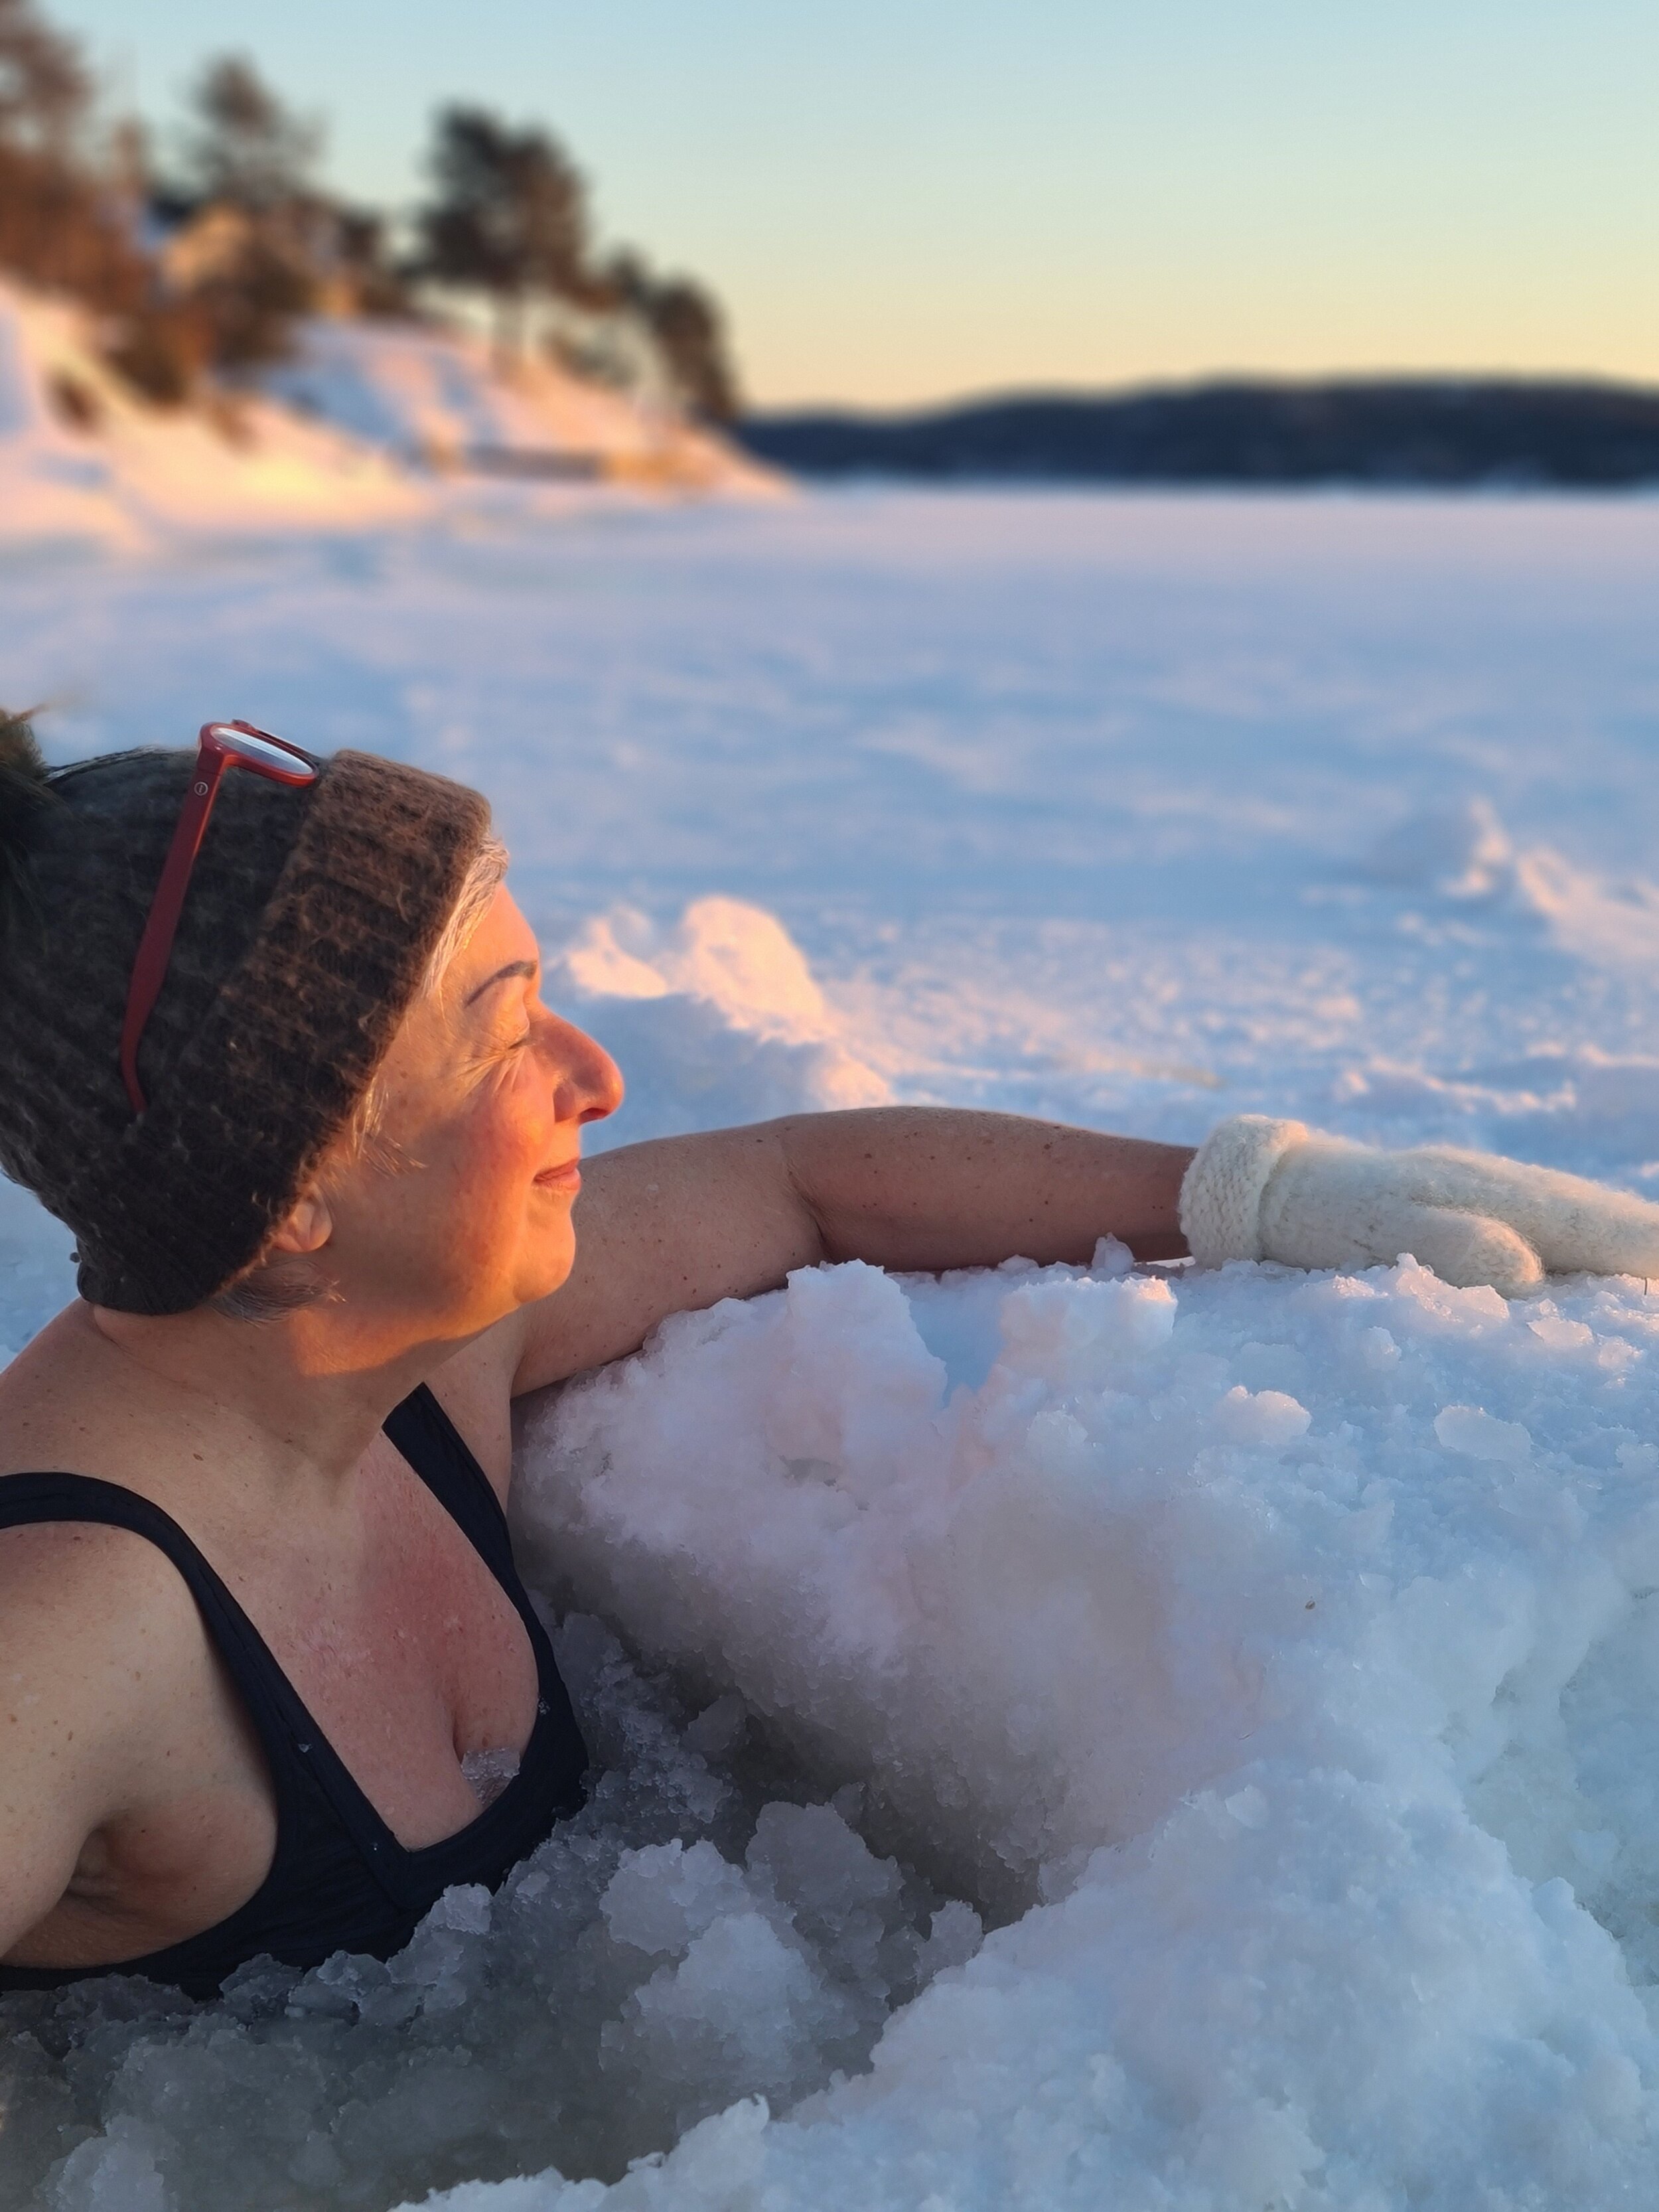 What do you need to take an icebath? — Wilhelmines universe